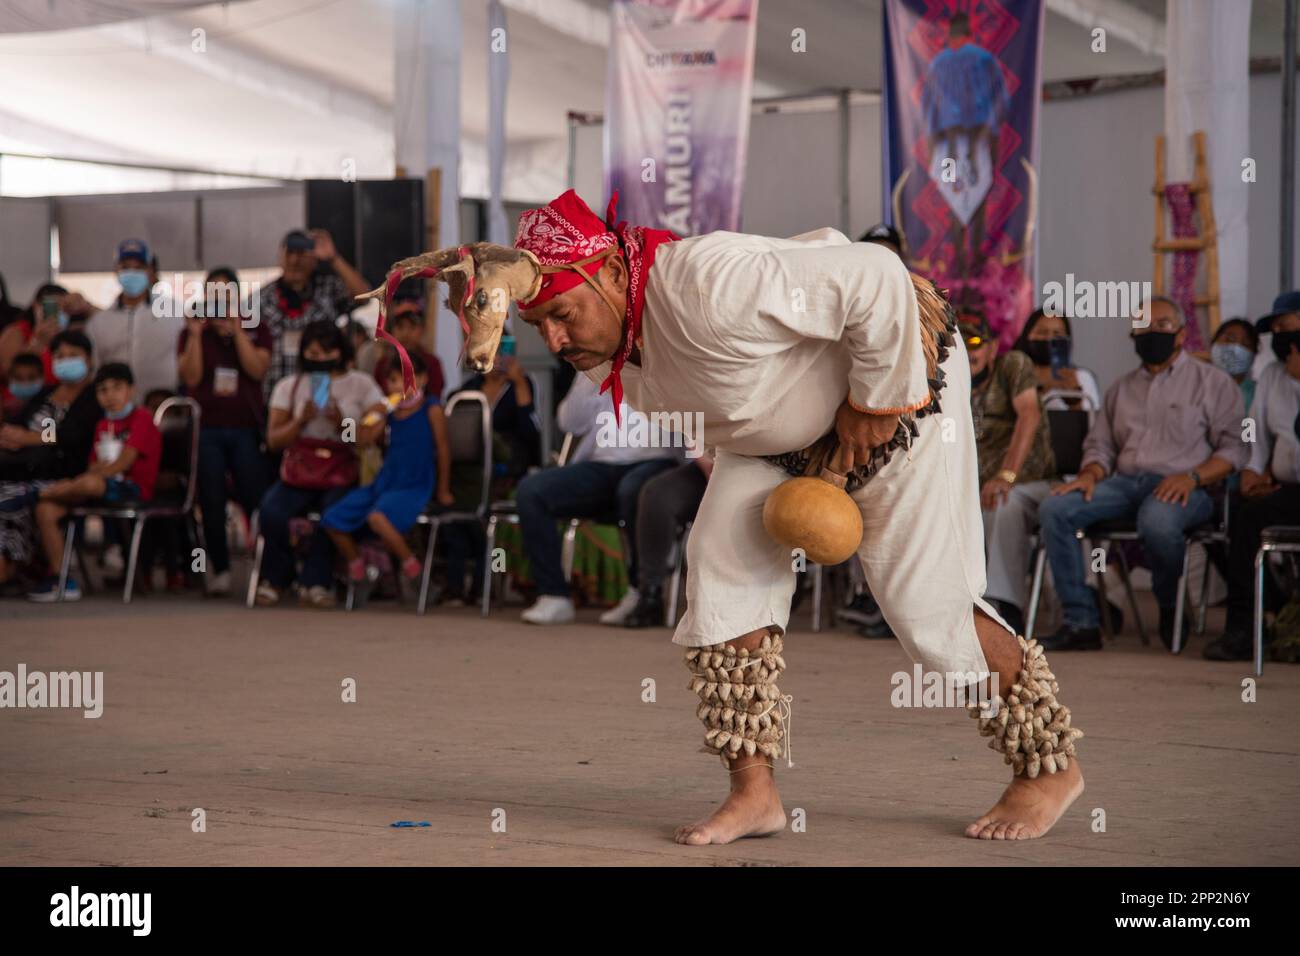 Francisco Javier Meléndrez Moragrega performs the danza del venado, or deer dance, on International Day of the World’s Indigenous Peoples in Chihuahua, Mexico on Aug. 7, 2022. It’s a traditional dance of the Yaqui and Mayo people from the states of Sonora and Sinaloa in northwest Mexico. (Lilette A. Contreras/Global Press Journal) Stock Photo